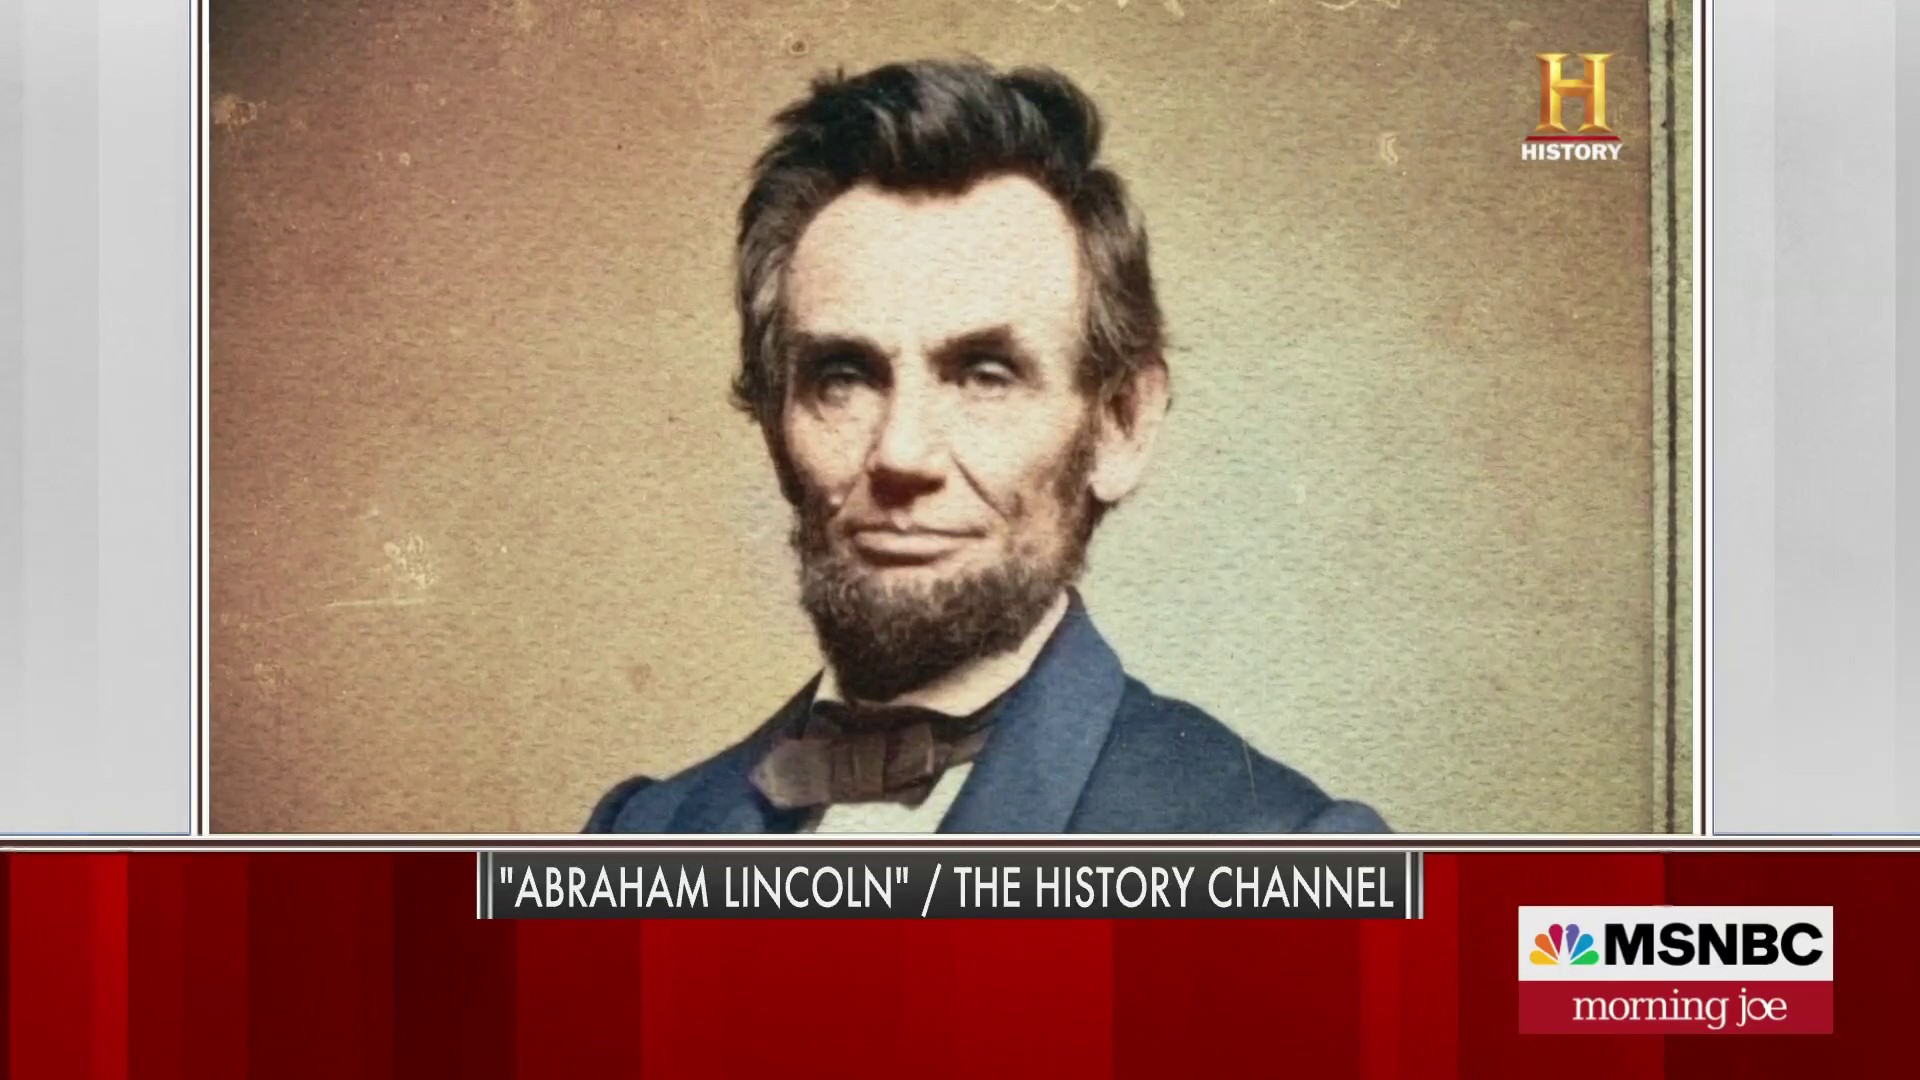 History Channel unveils new 'Abraham Lincoln' documentary series